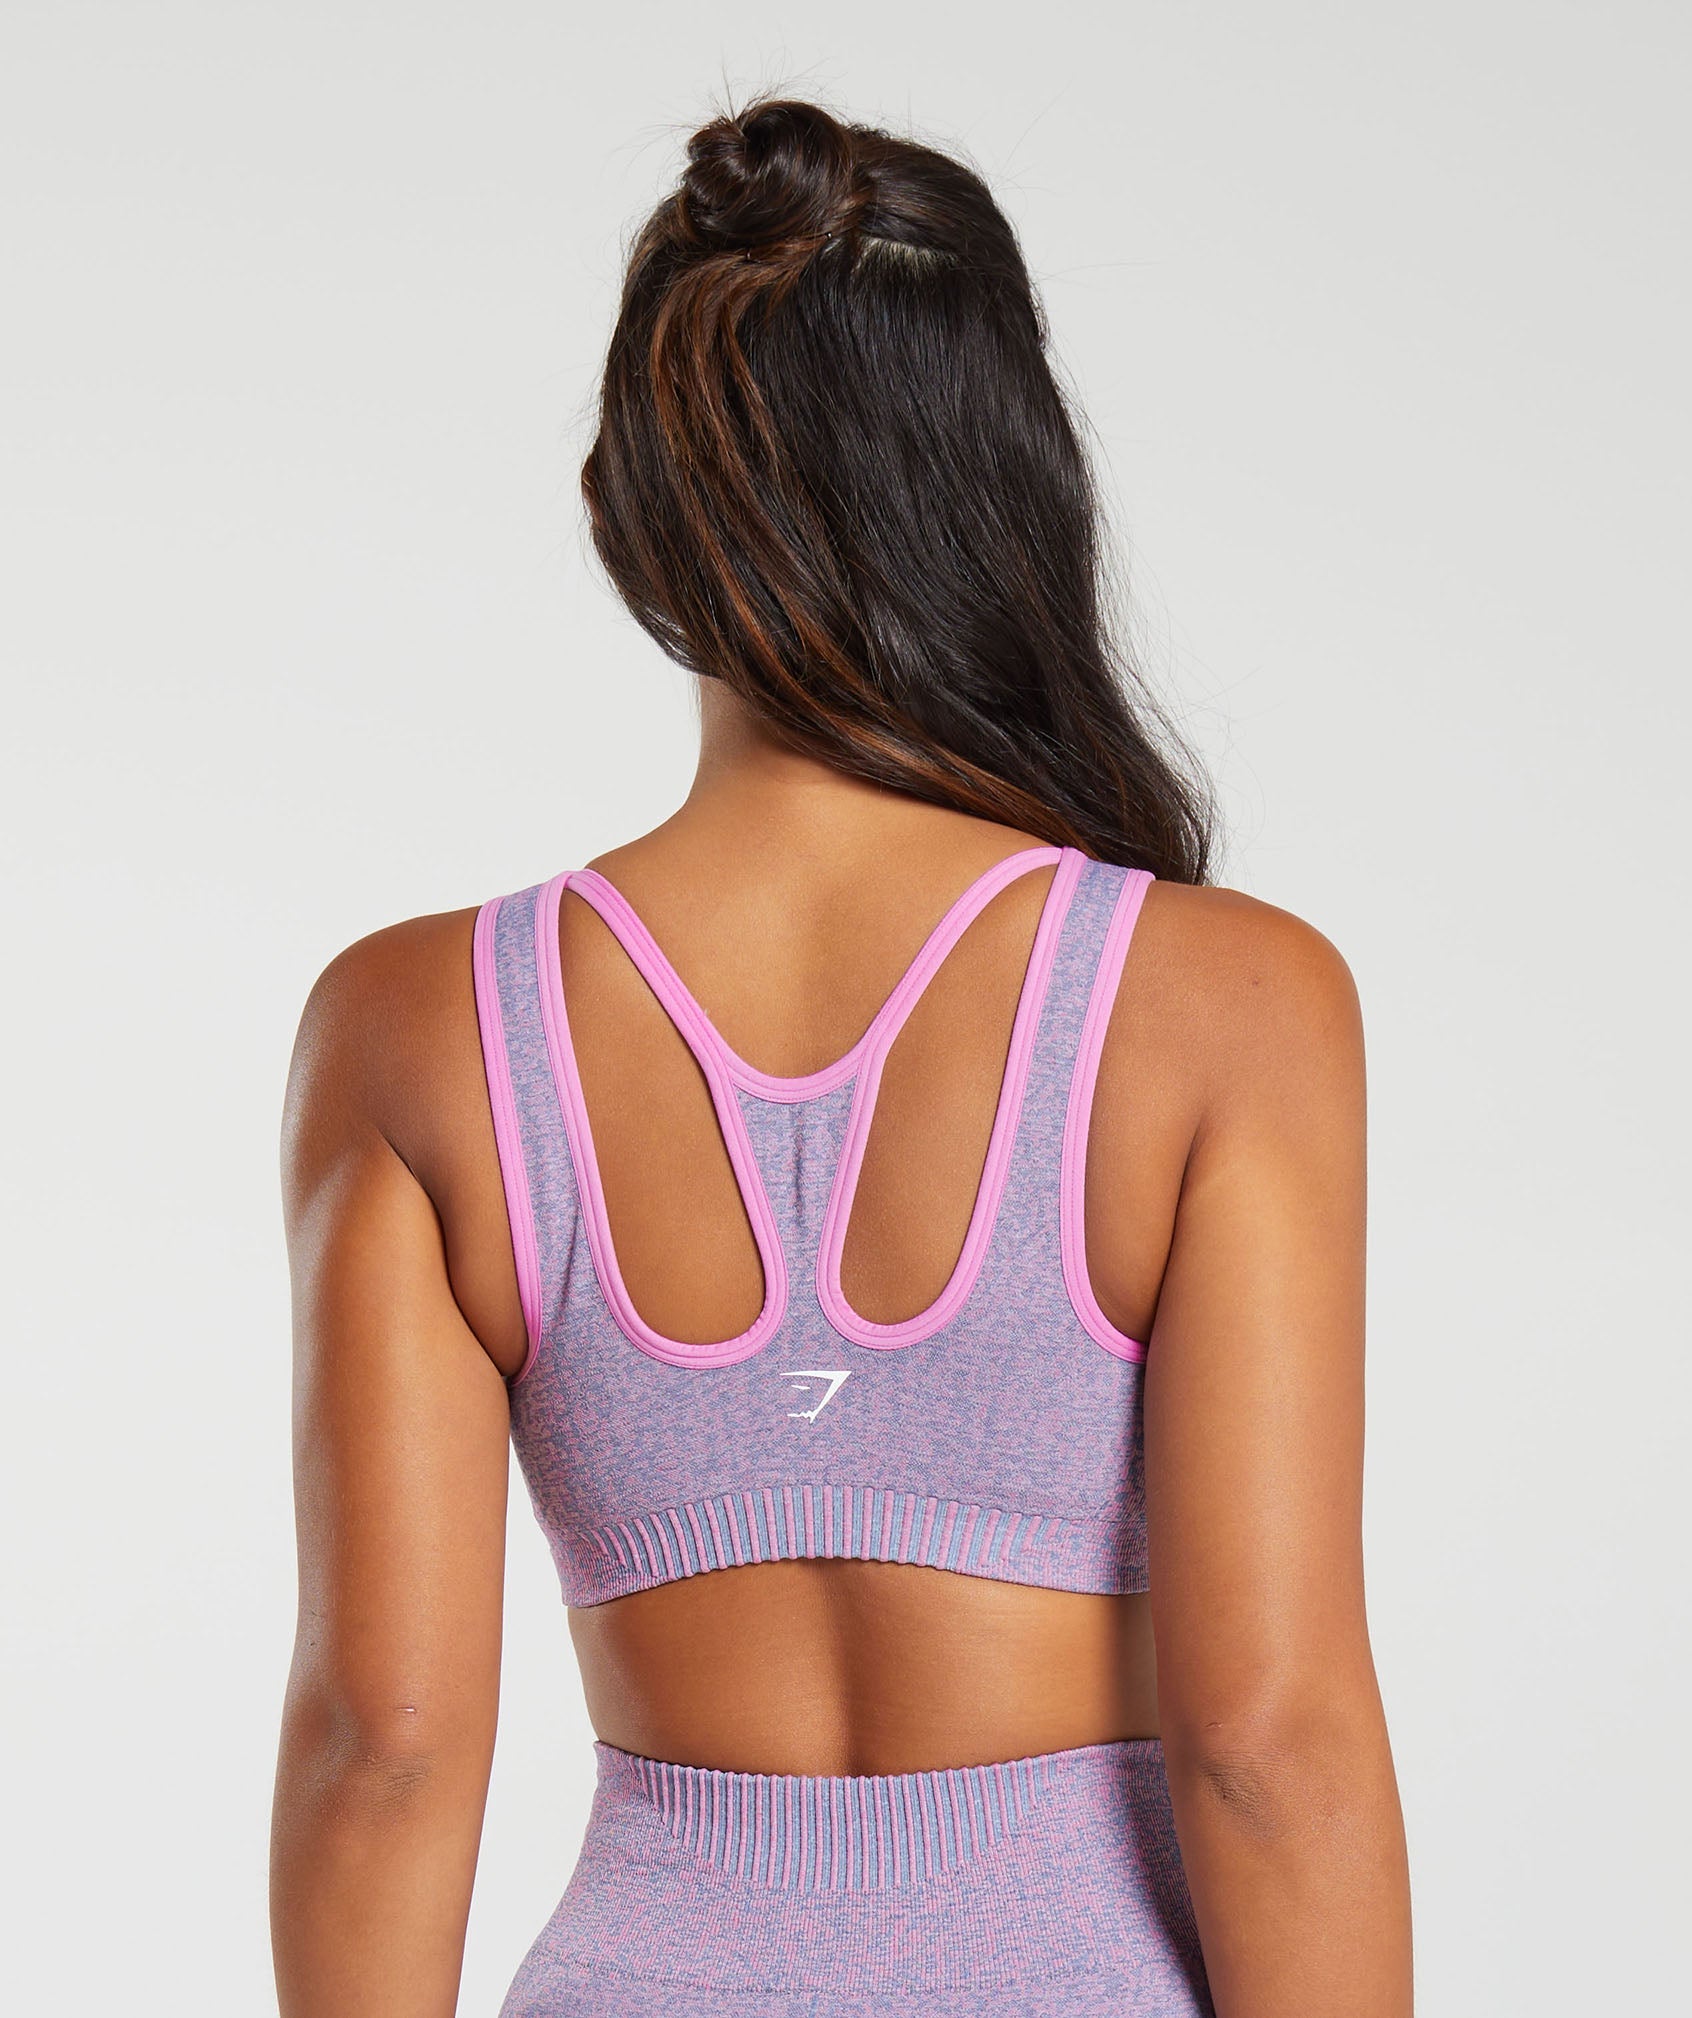 BNWOT Gymshark Pink Ruched Sports Bra - XL, Extra Large